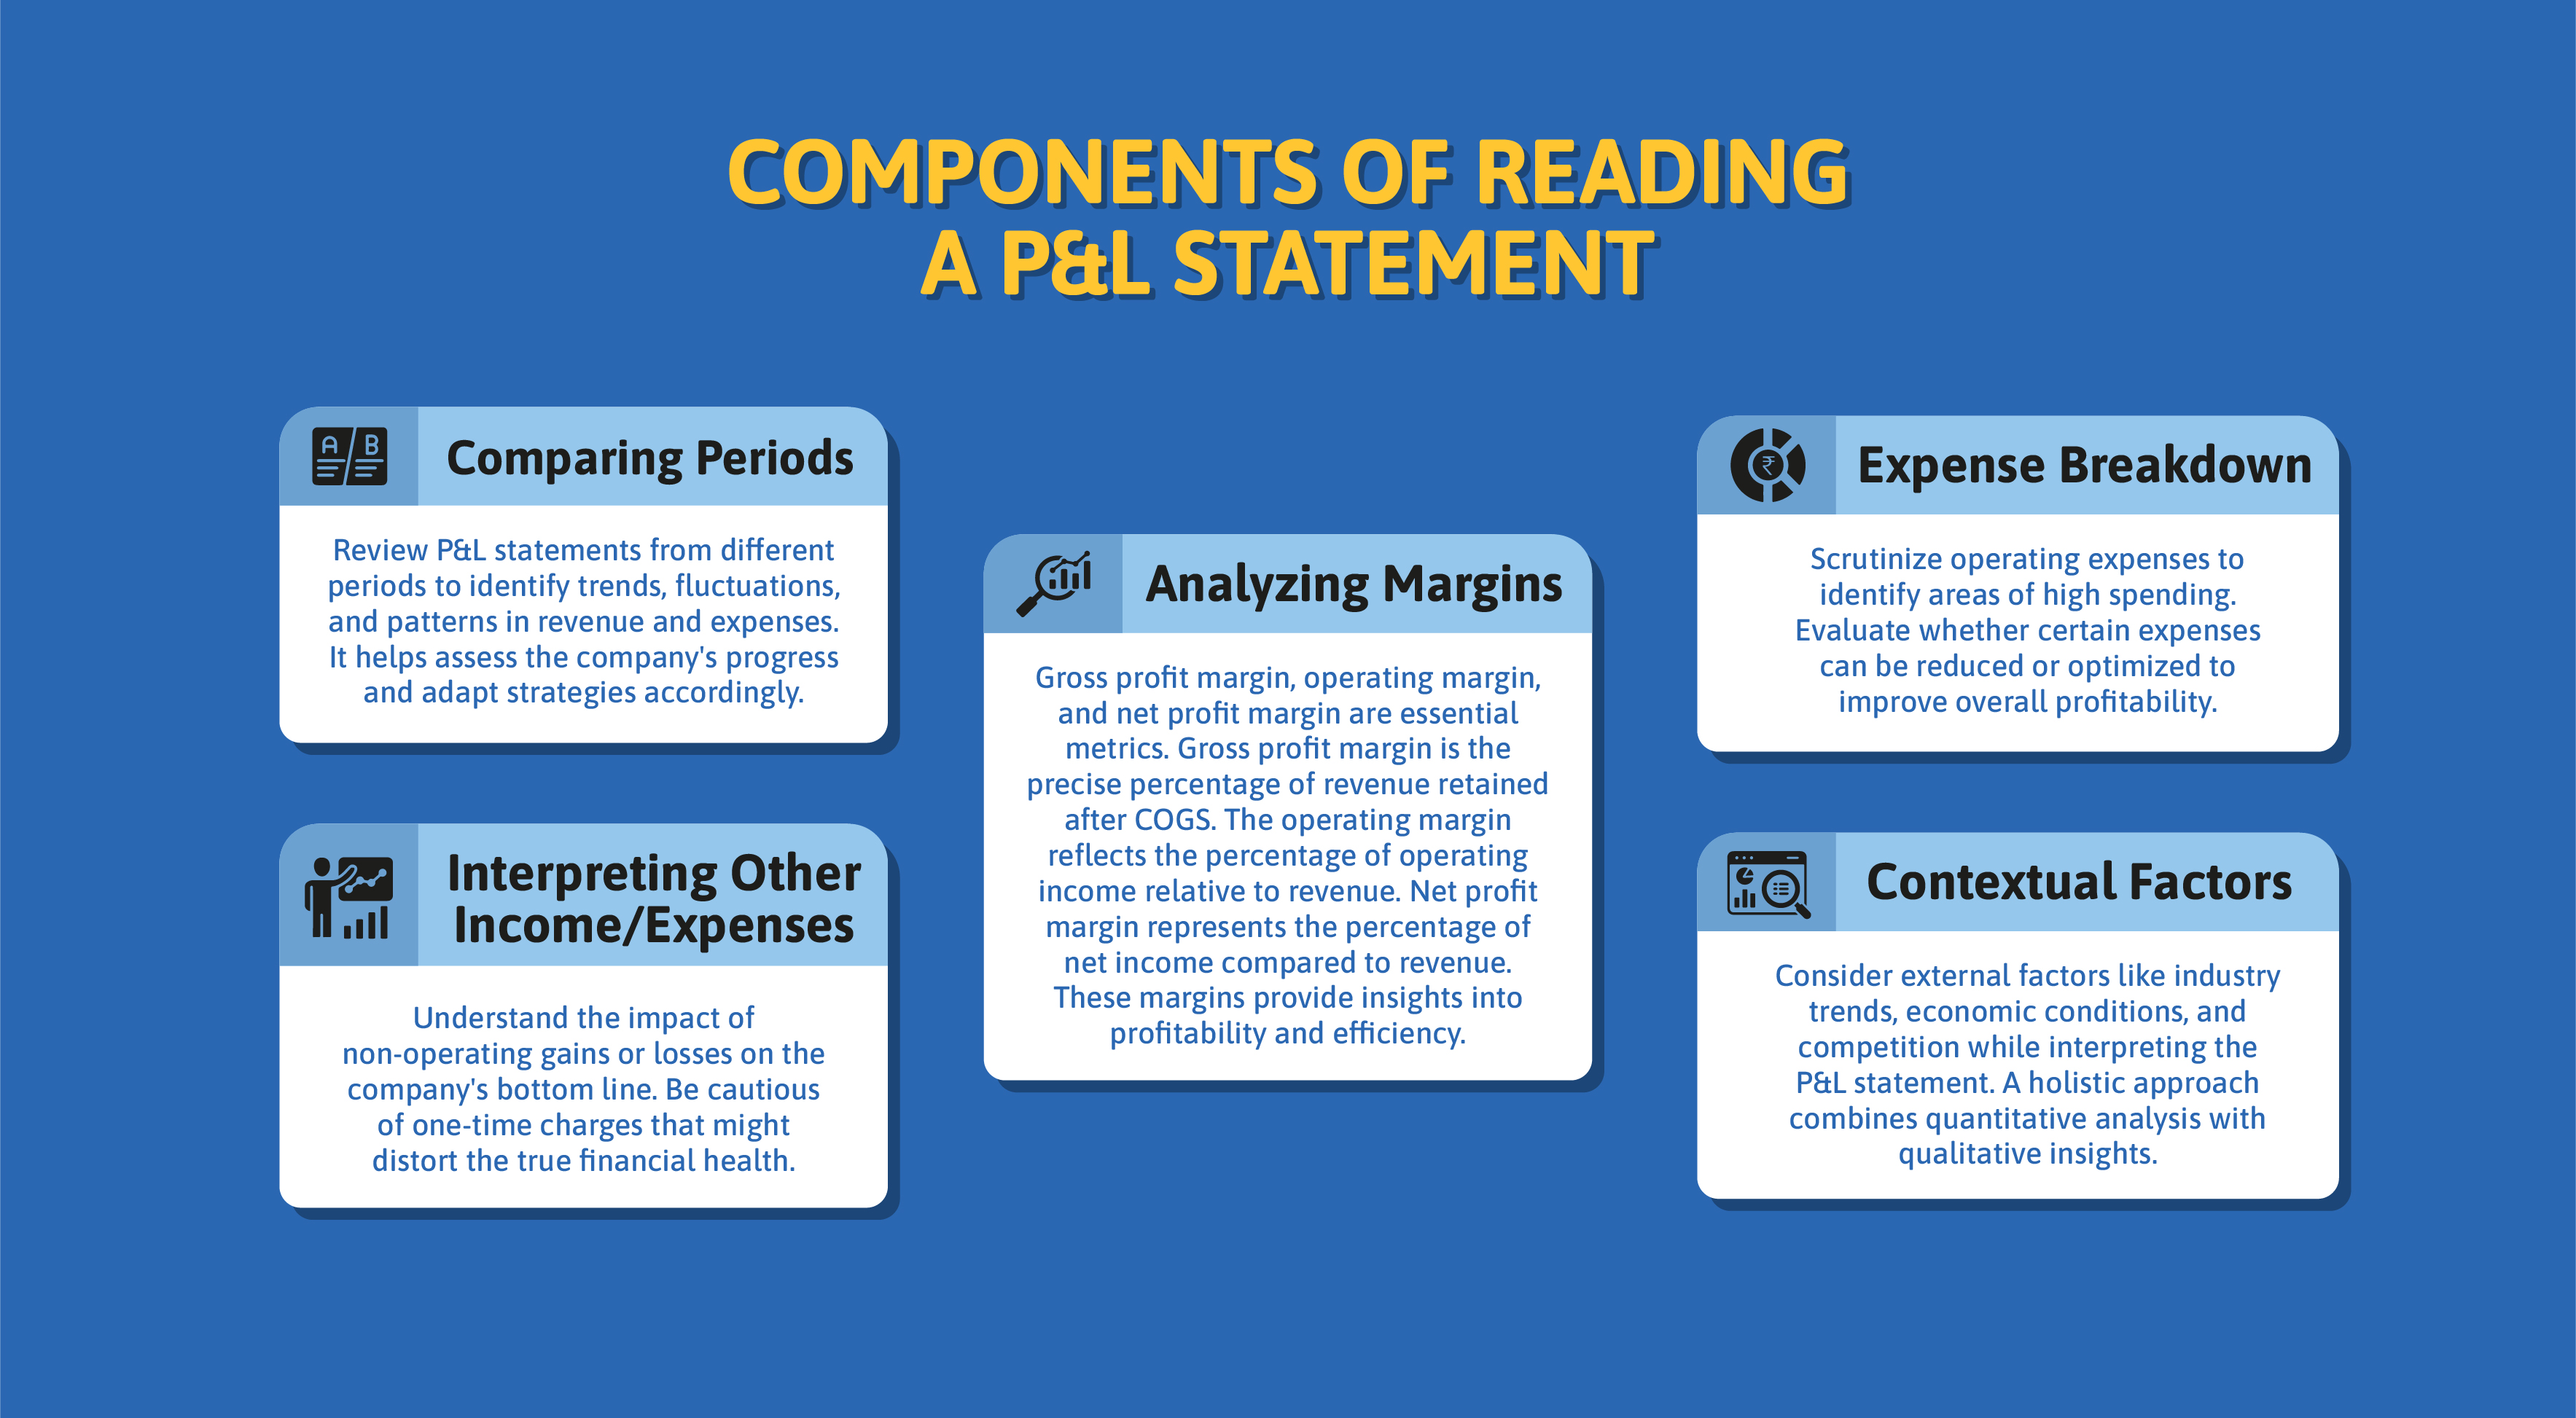 Components of Reading a P&L Statement